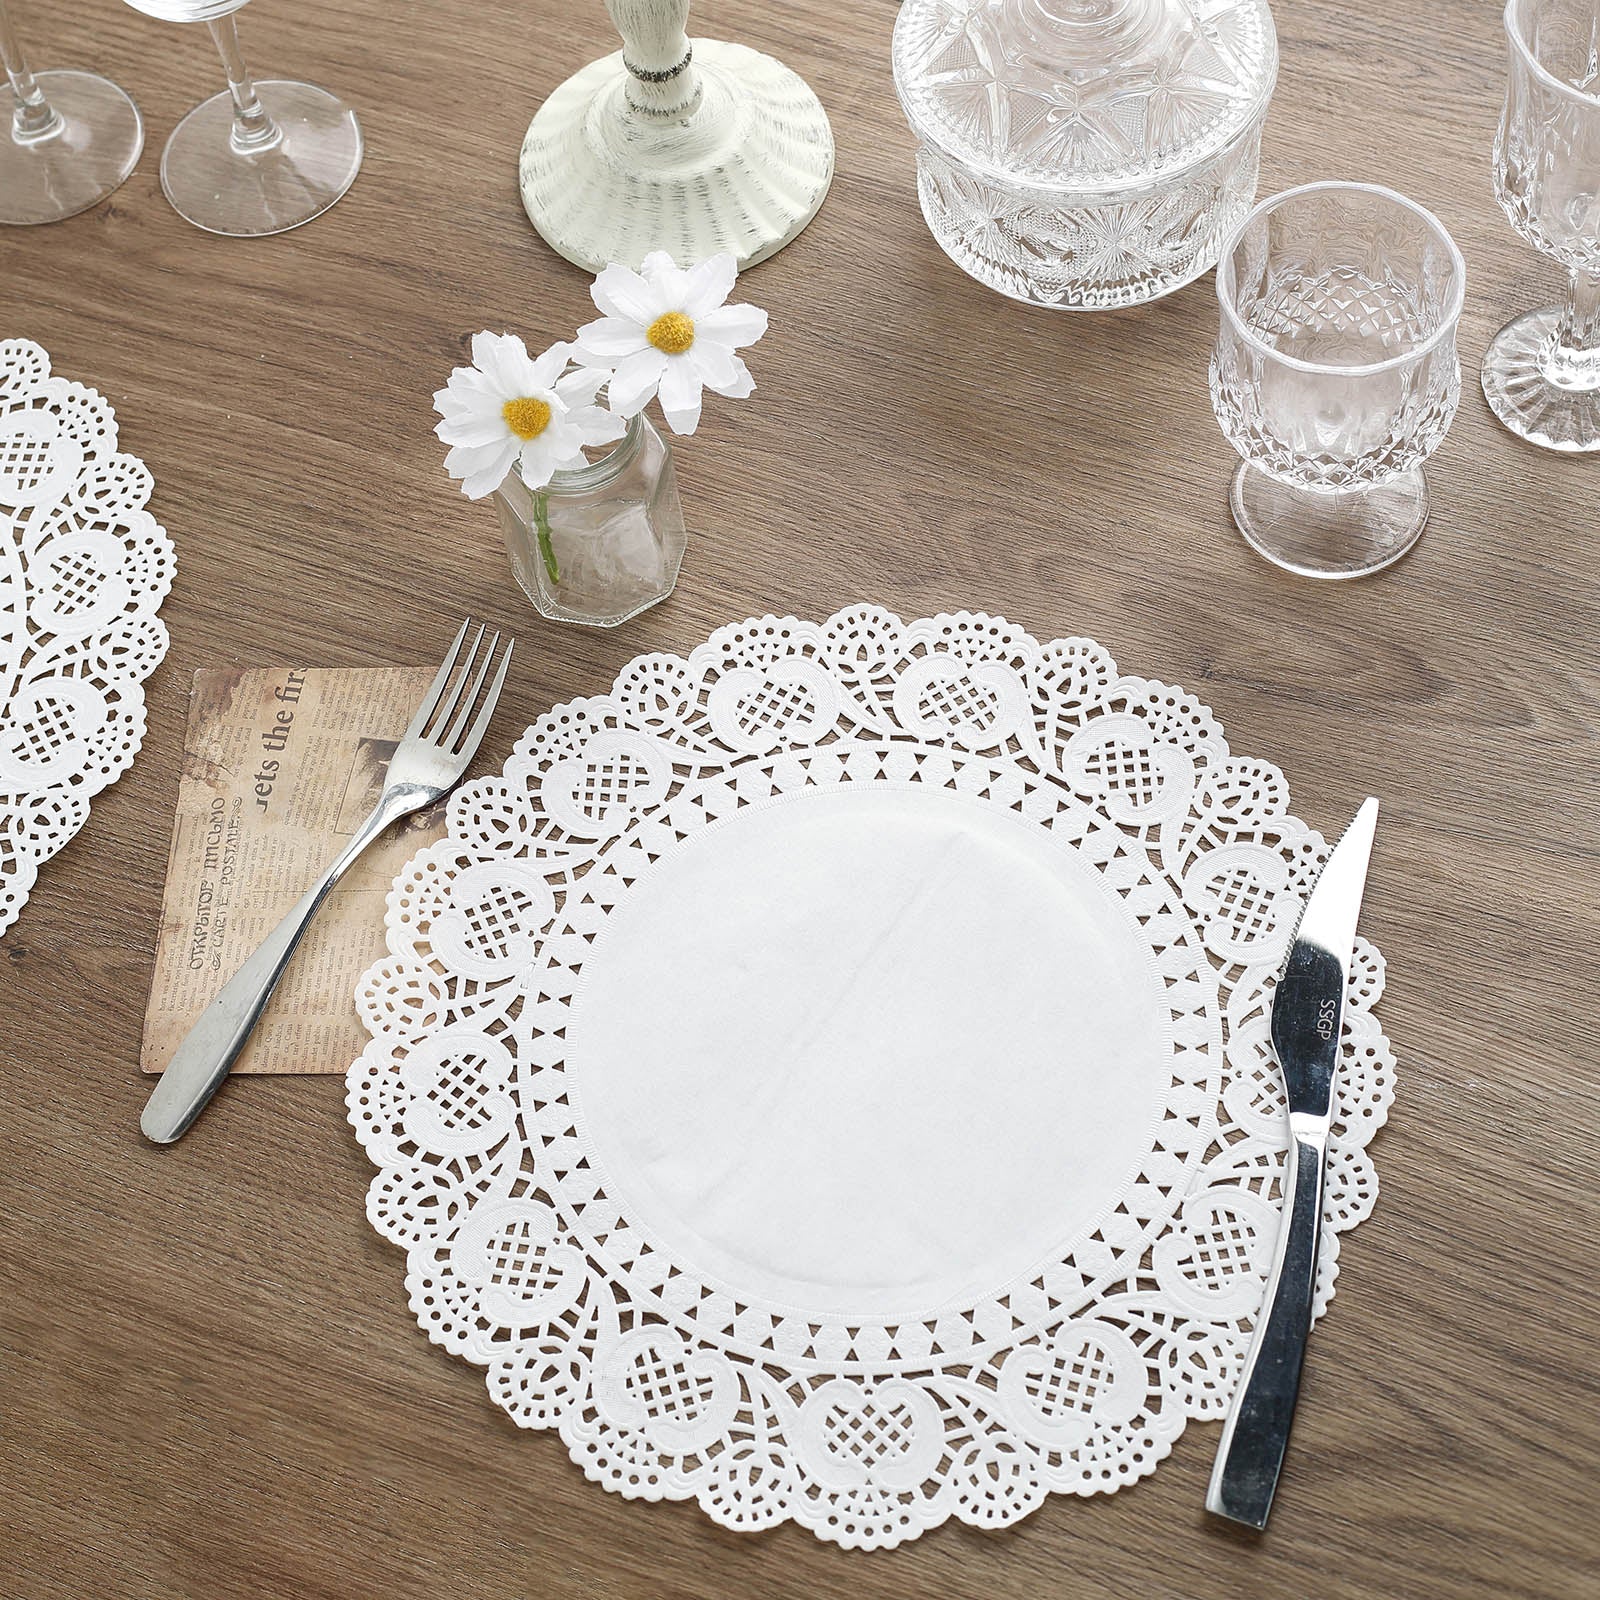 100 Pcs | 12 Round White Lace Paper Doilies, Food Grade Paper Placemats | by Tableclothsfactory